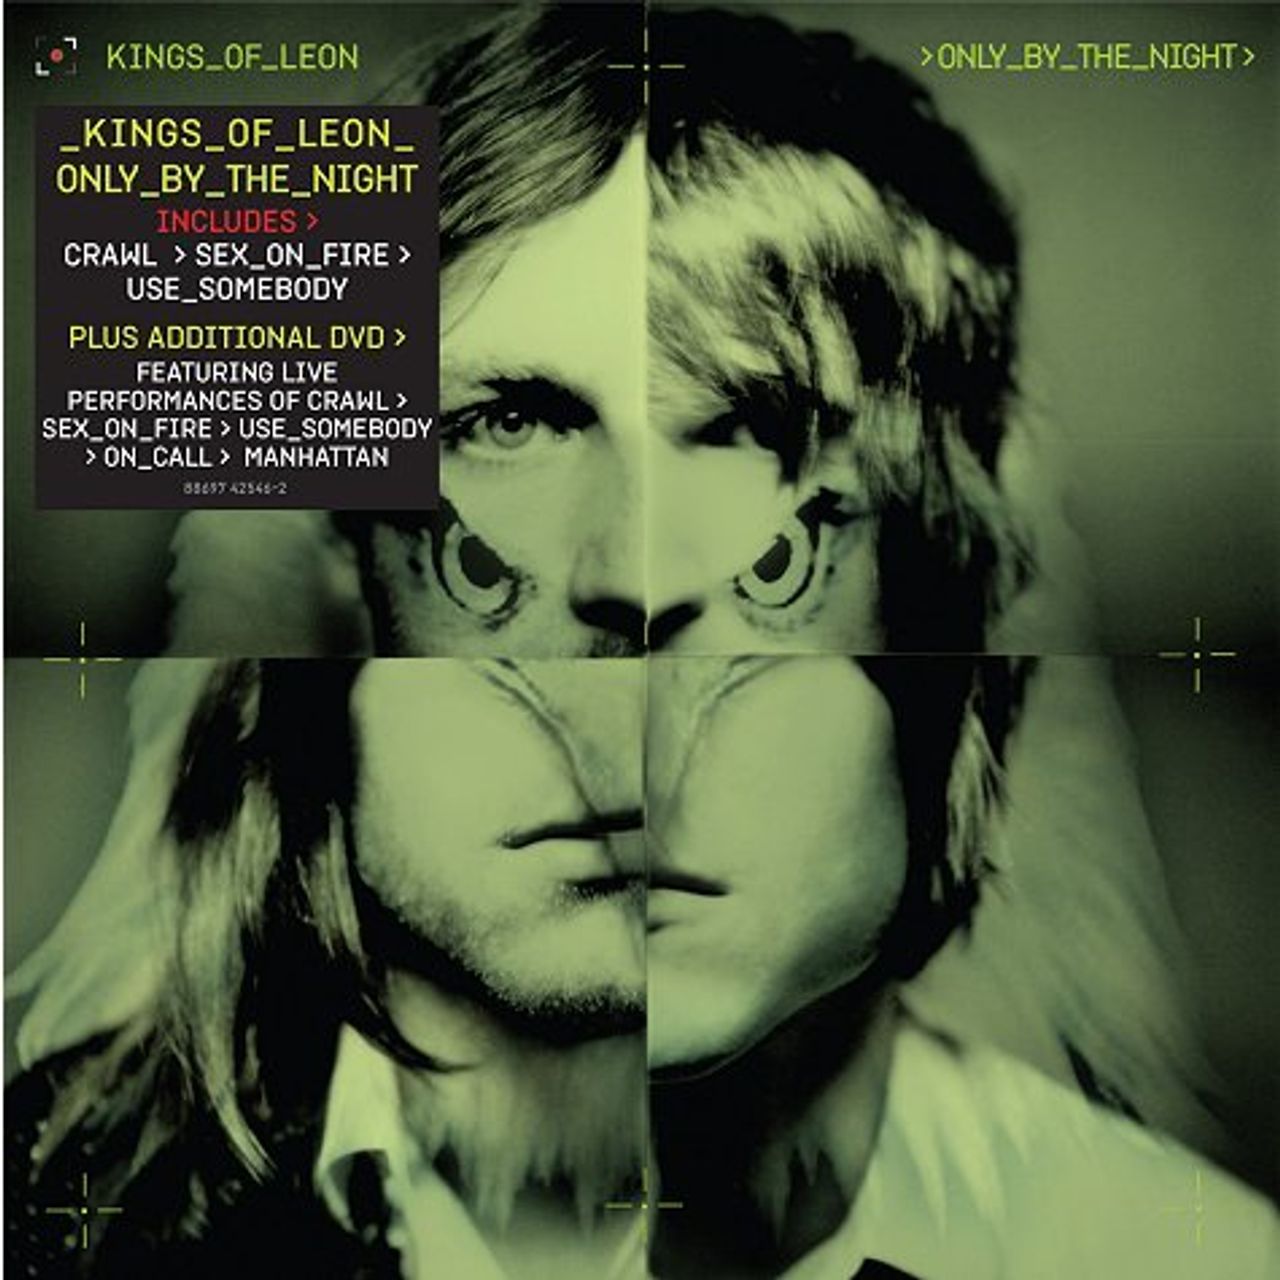 Kings Of Leon Only By The Night - UK Tour Edition UK 2-disc CD/DVD set 88697425462